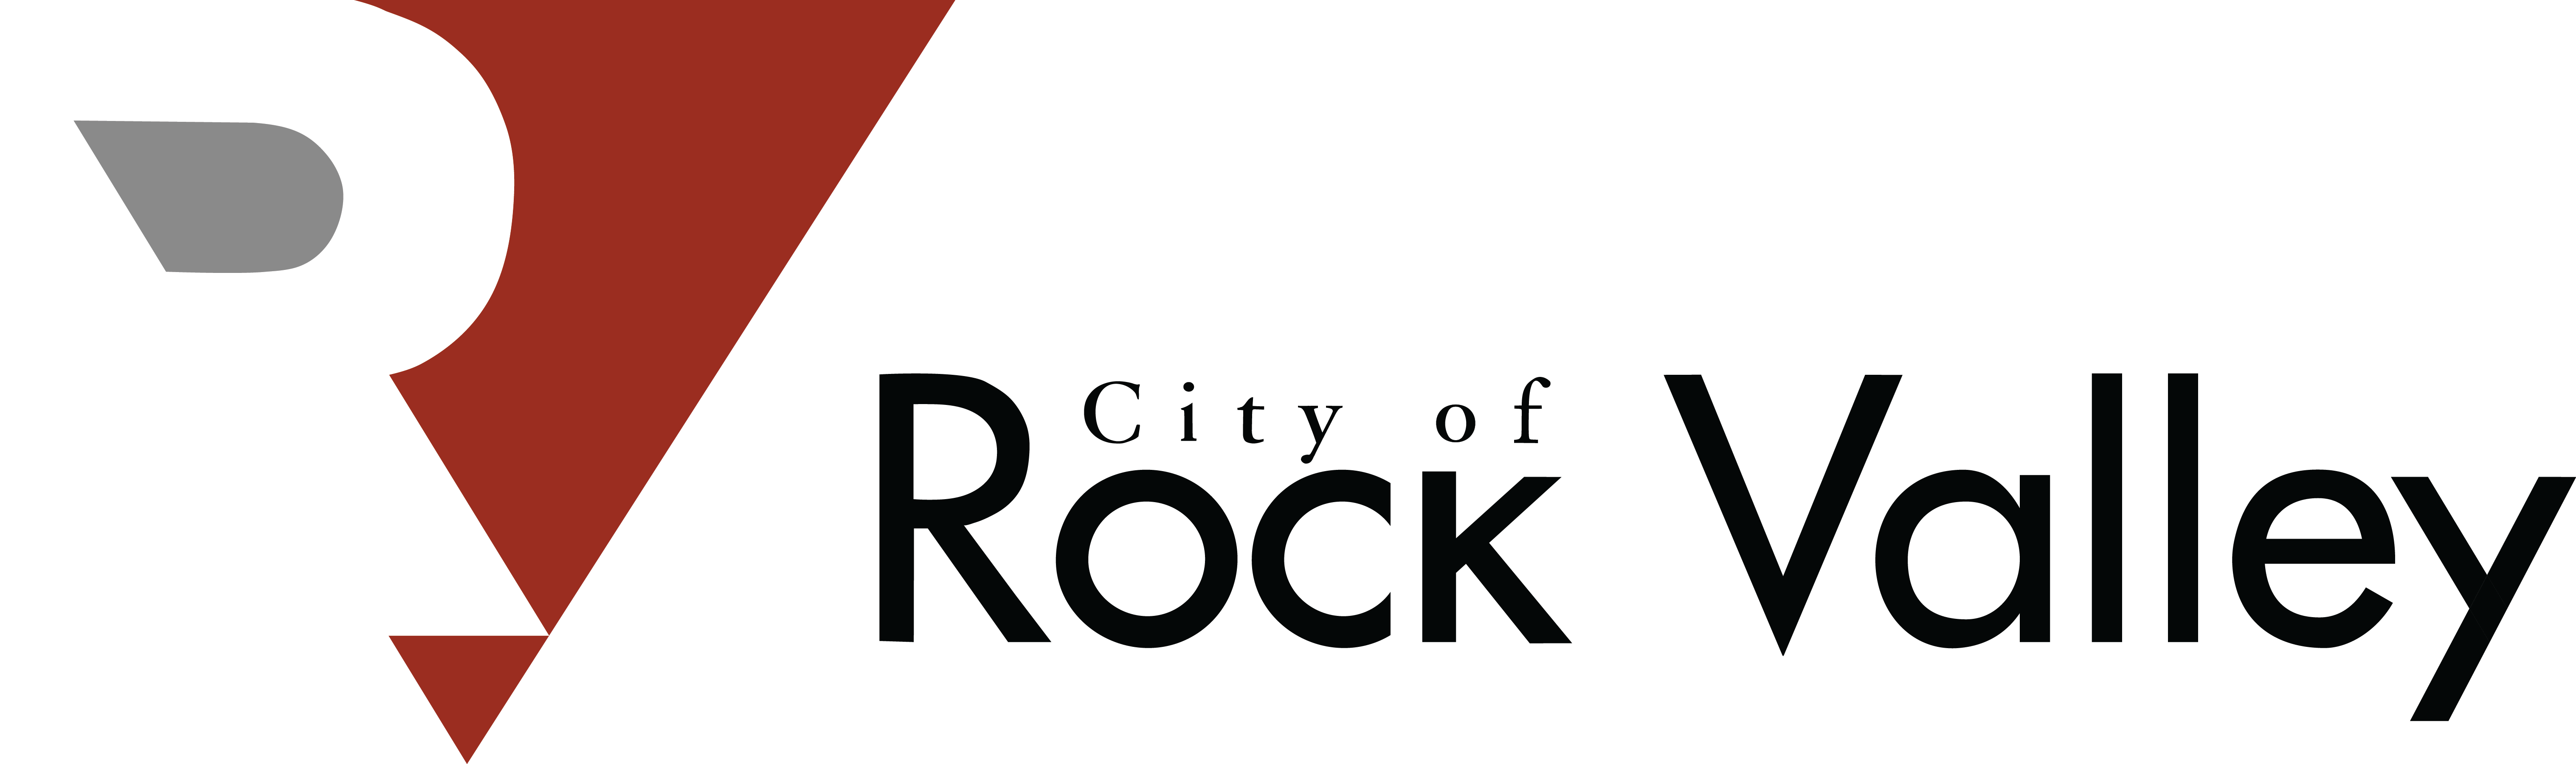 City of Rock Valley